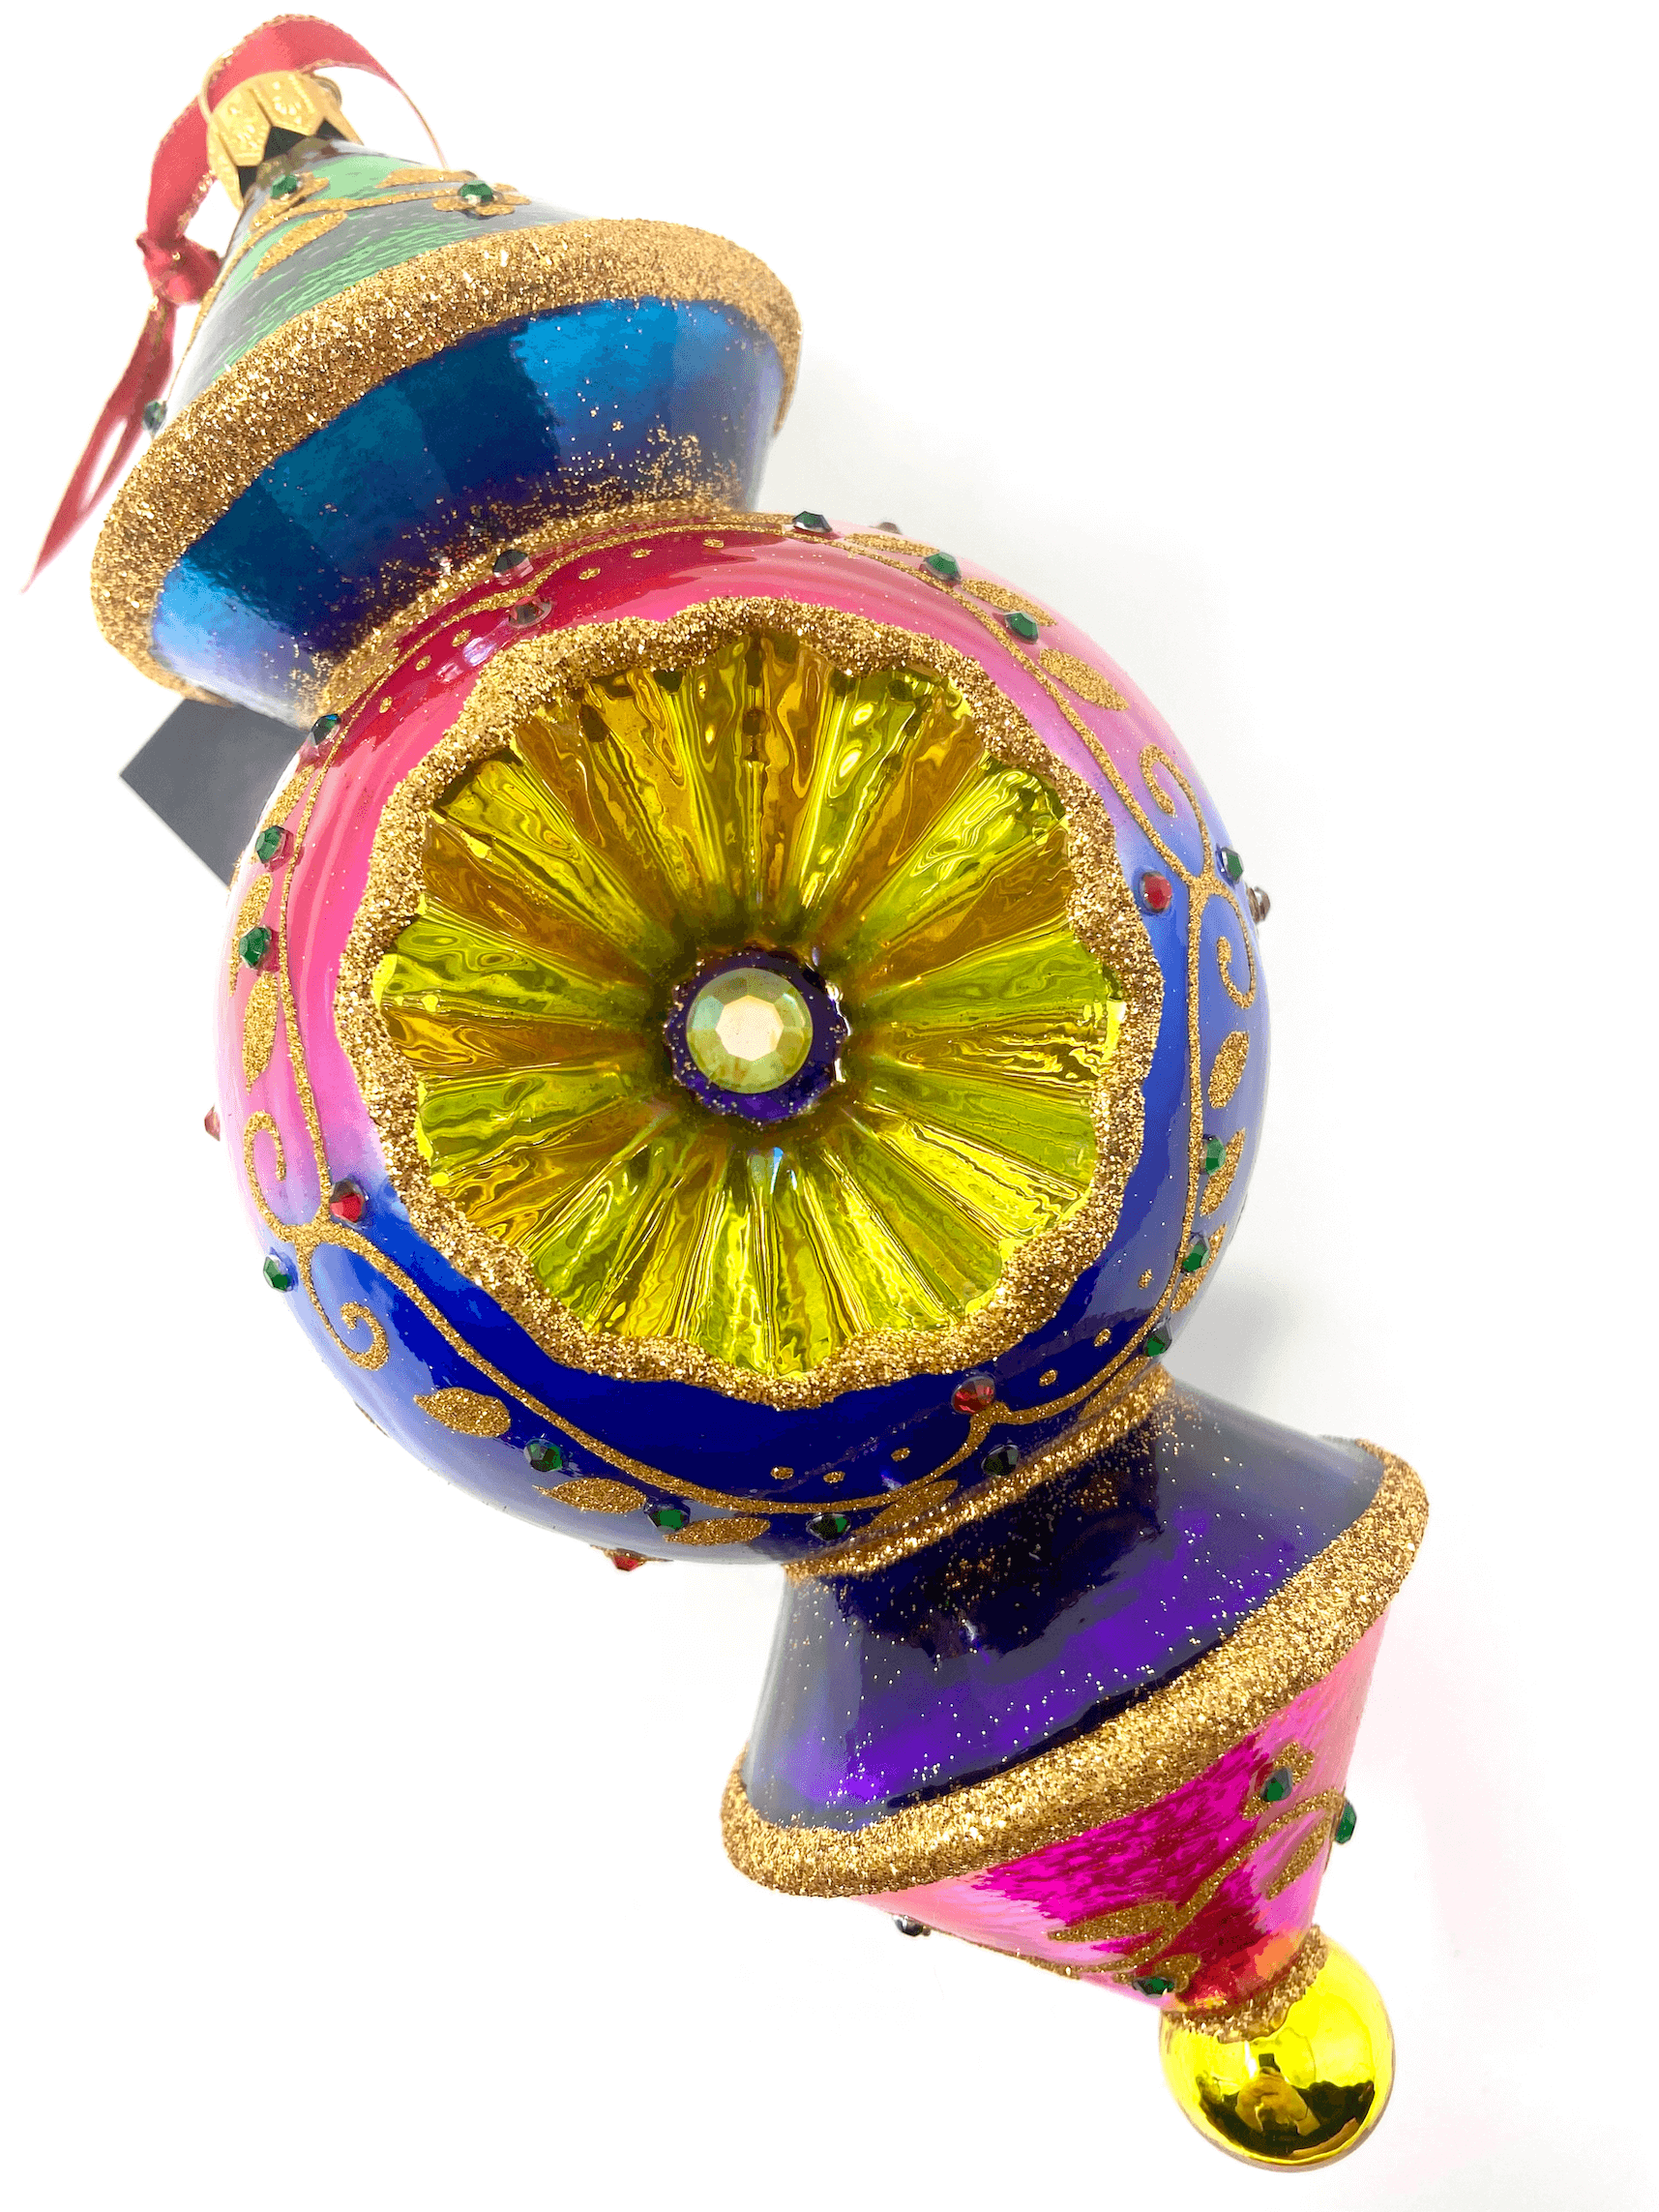 Rainbow triple barrel ornament with single reflector. Features gradient rainbow color and gold accents. Christmas polish glass ornaments.